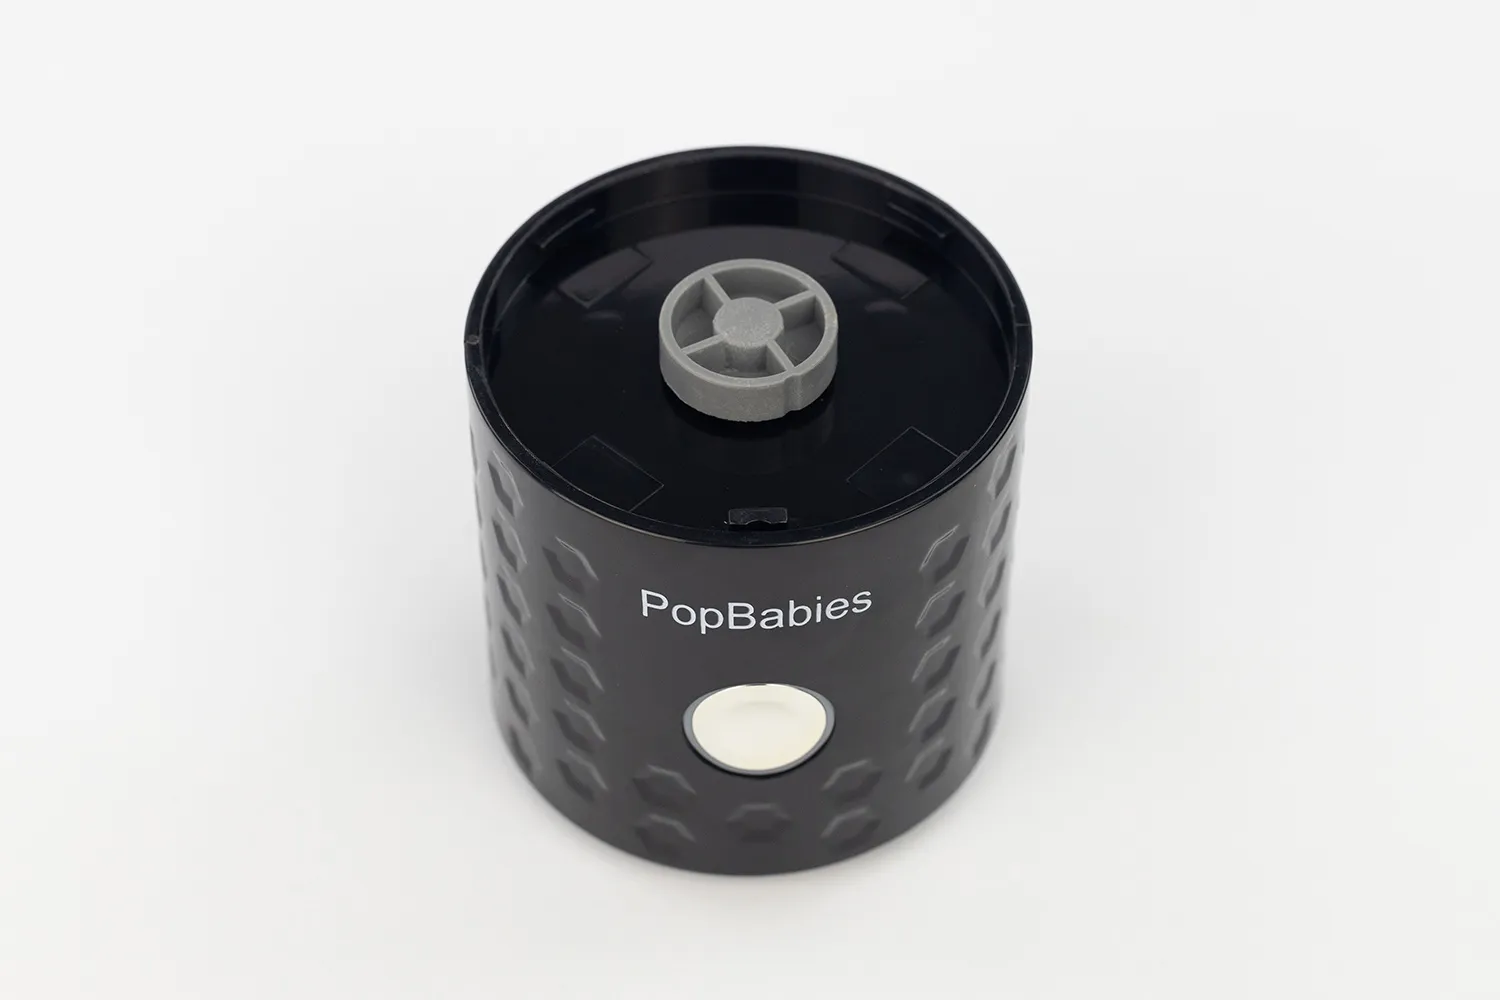 PopBabies portable blender review: It's lacking in battery life